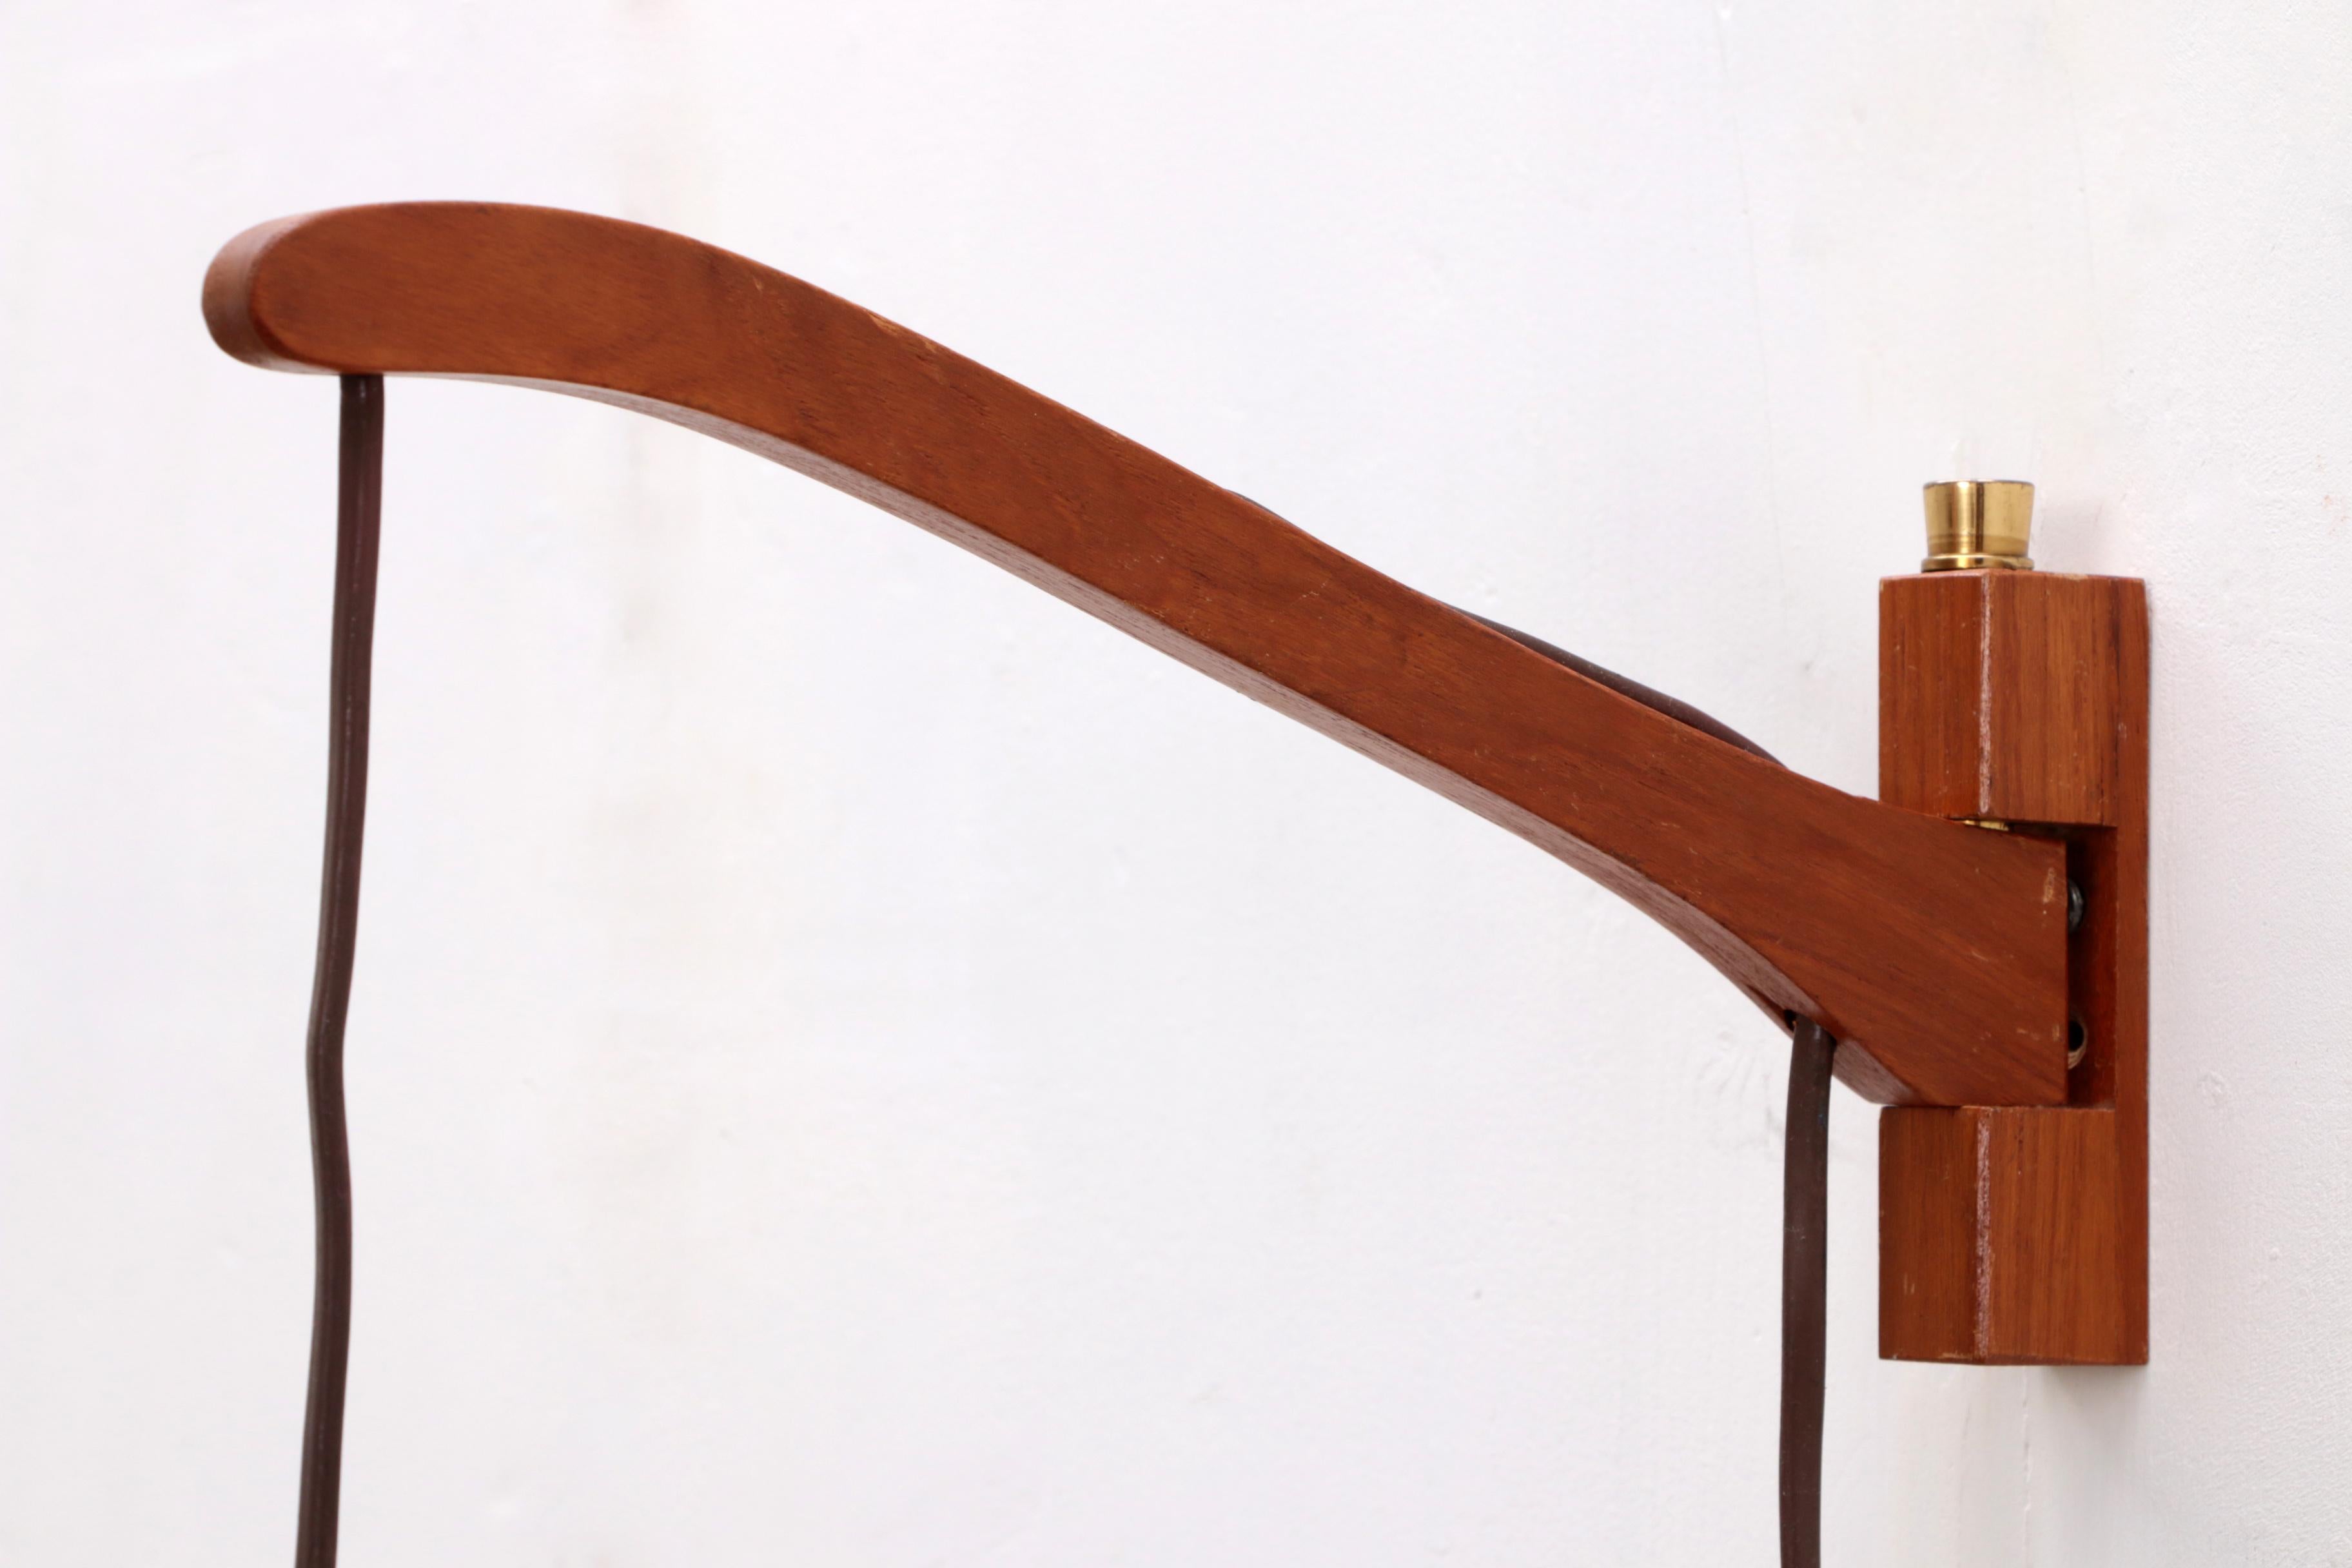 Rope Vintage Wall hanging lamp made of rope and teak, 1960s Sweden.